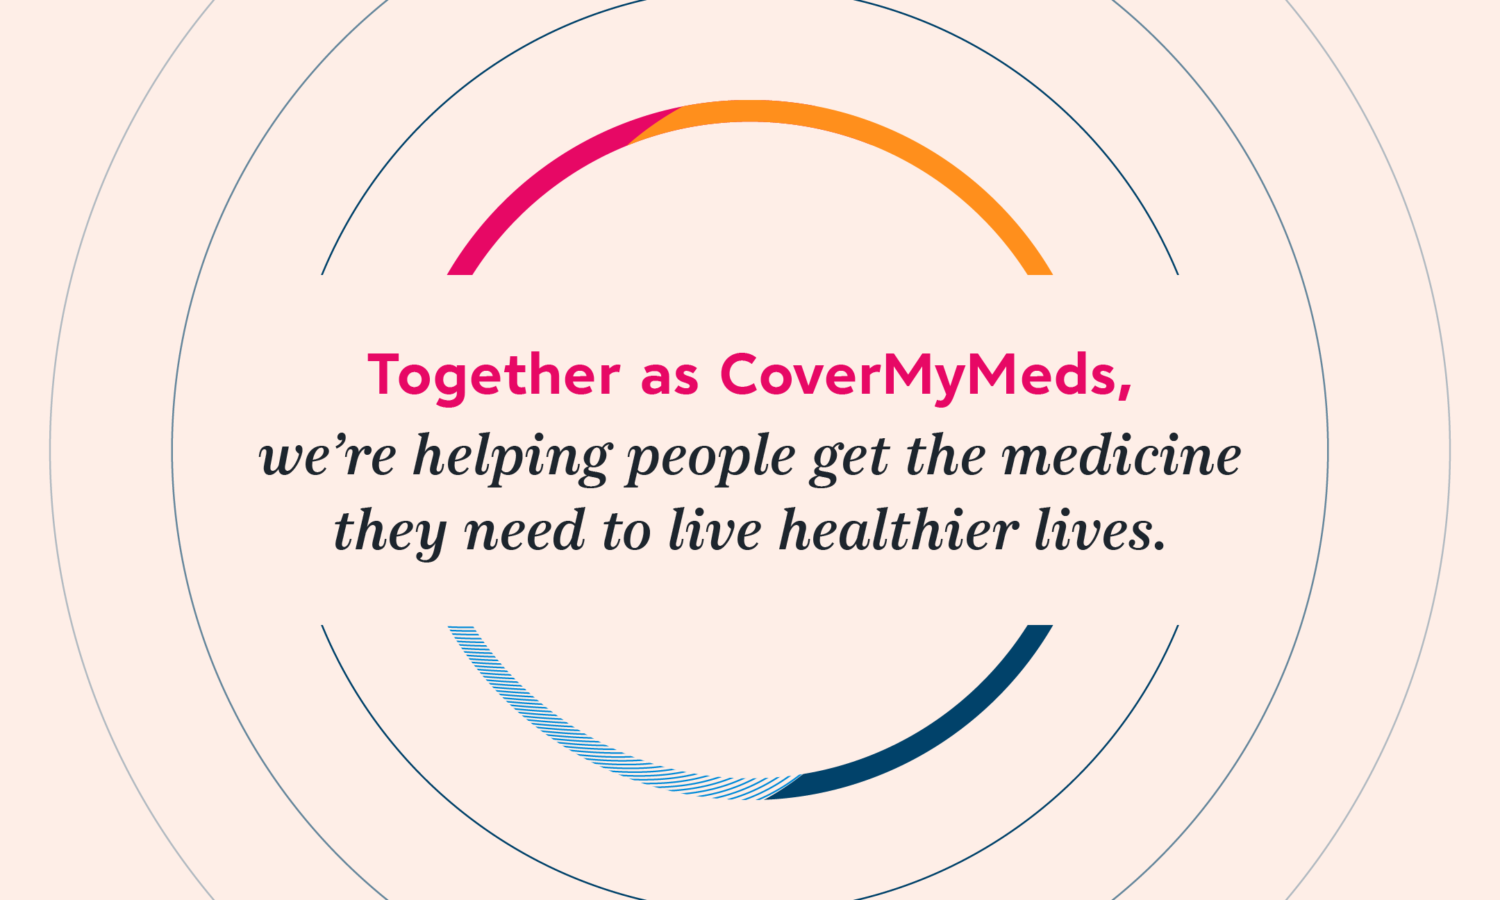 RelayHealth, McKesson Prescription Automation, CoverMyMeds, and RxCrossroads by McKesson have unified as one business and one team under the CoverMyMeds brand